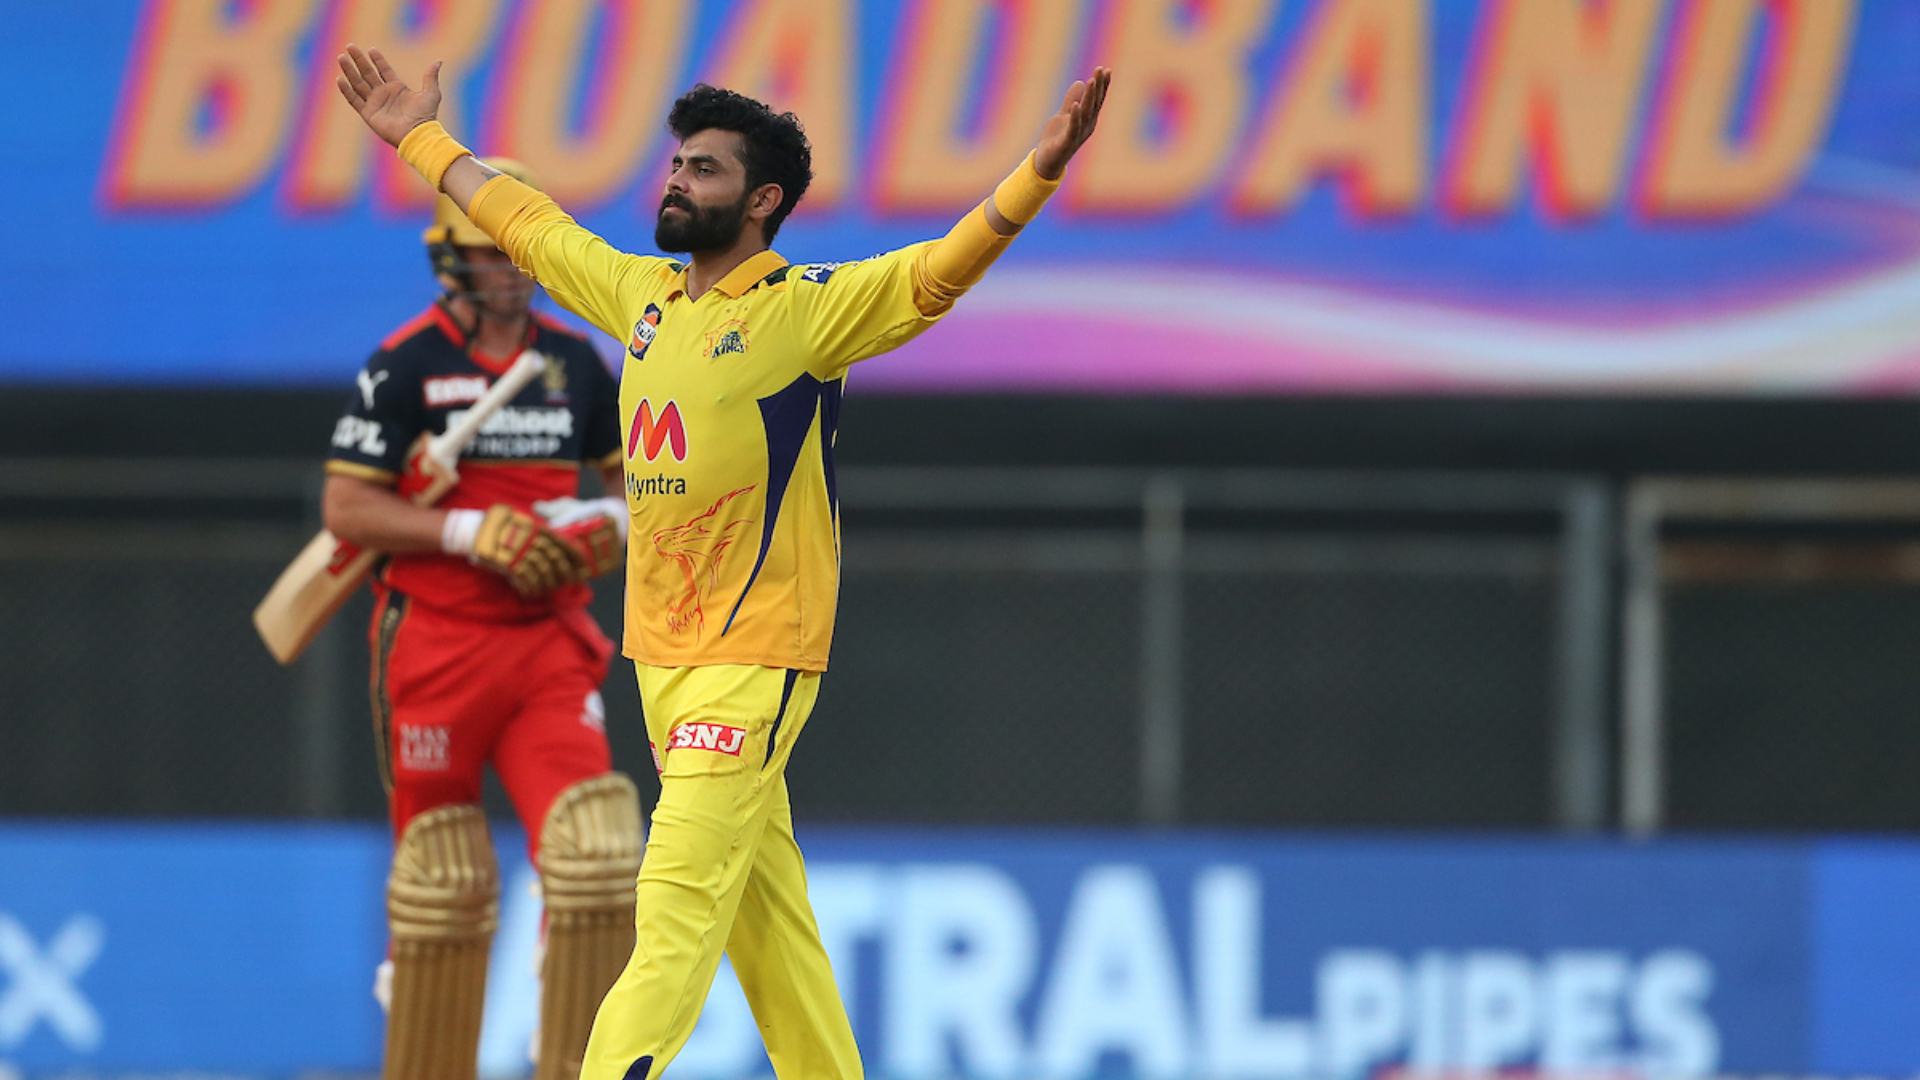 Ravindra Jadeja blasted a 24-ball fifty and took three wickets to give Chennai Super Kings a big win.